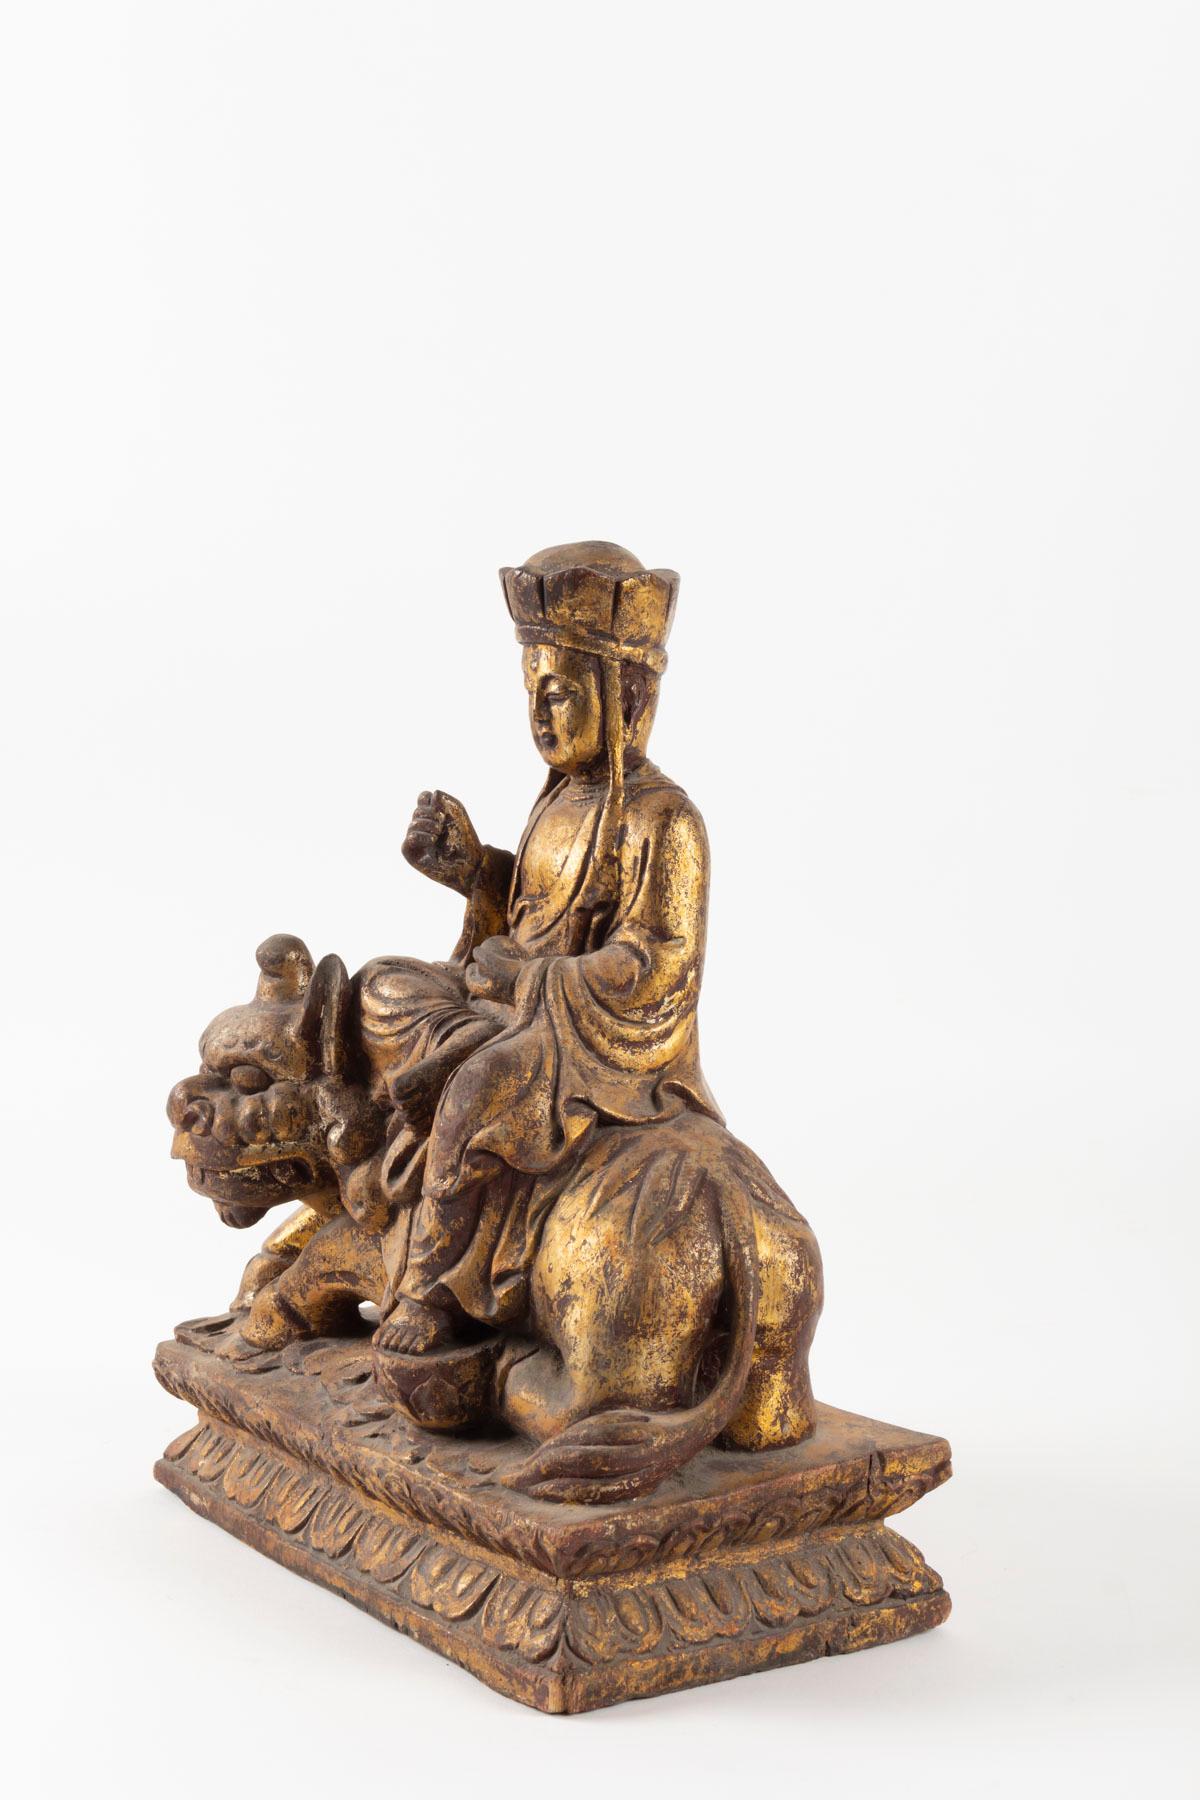 Gilt Golden Wooden Buddhist Deity, Seated on a Lion, China, Late 19th Century